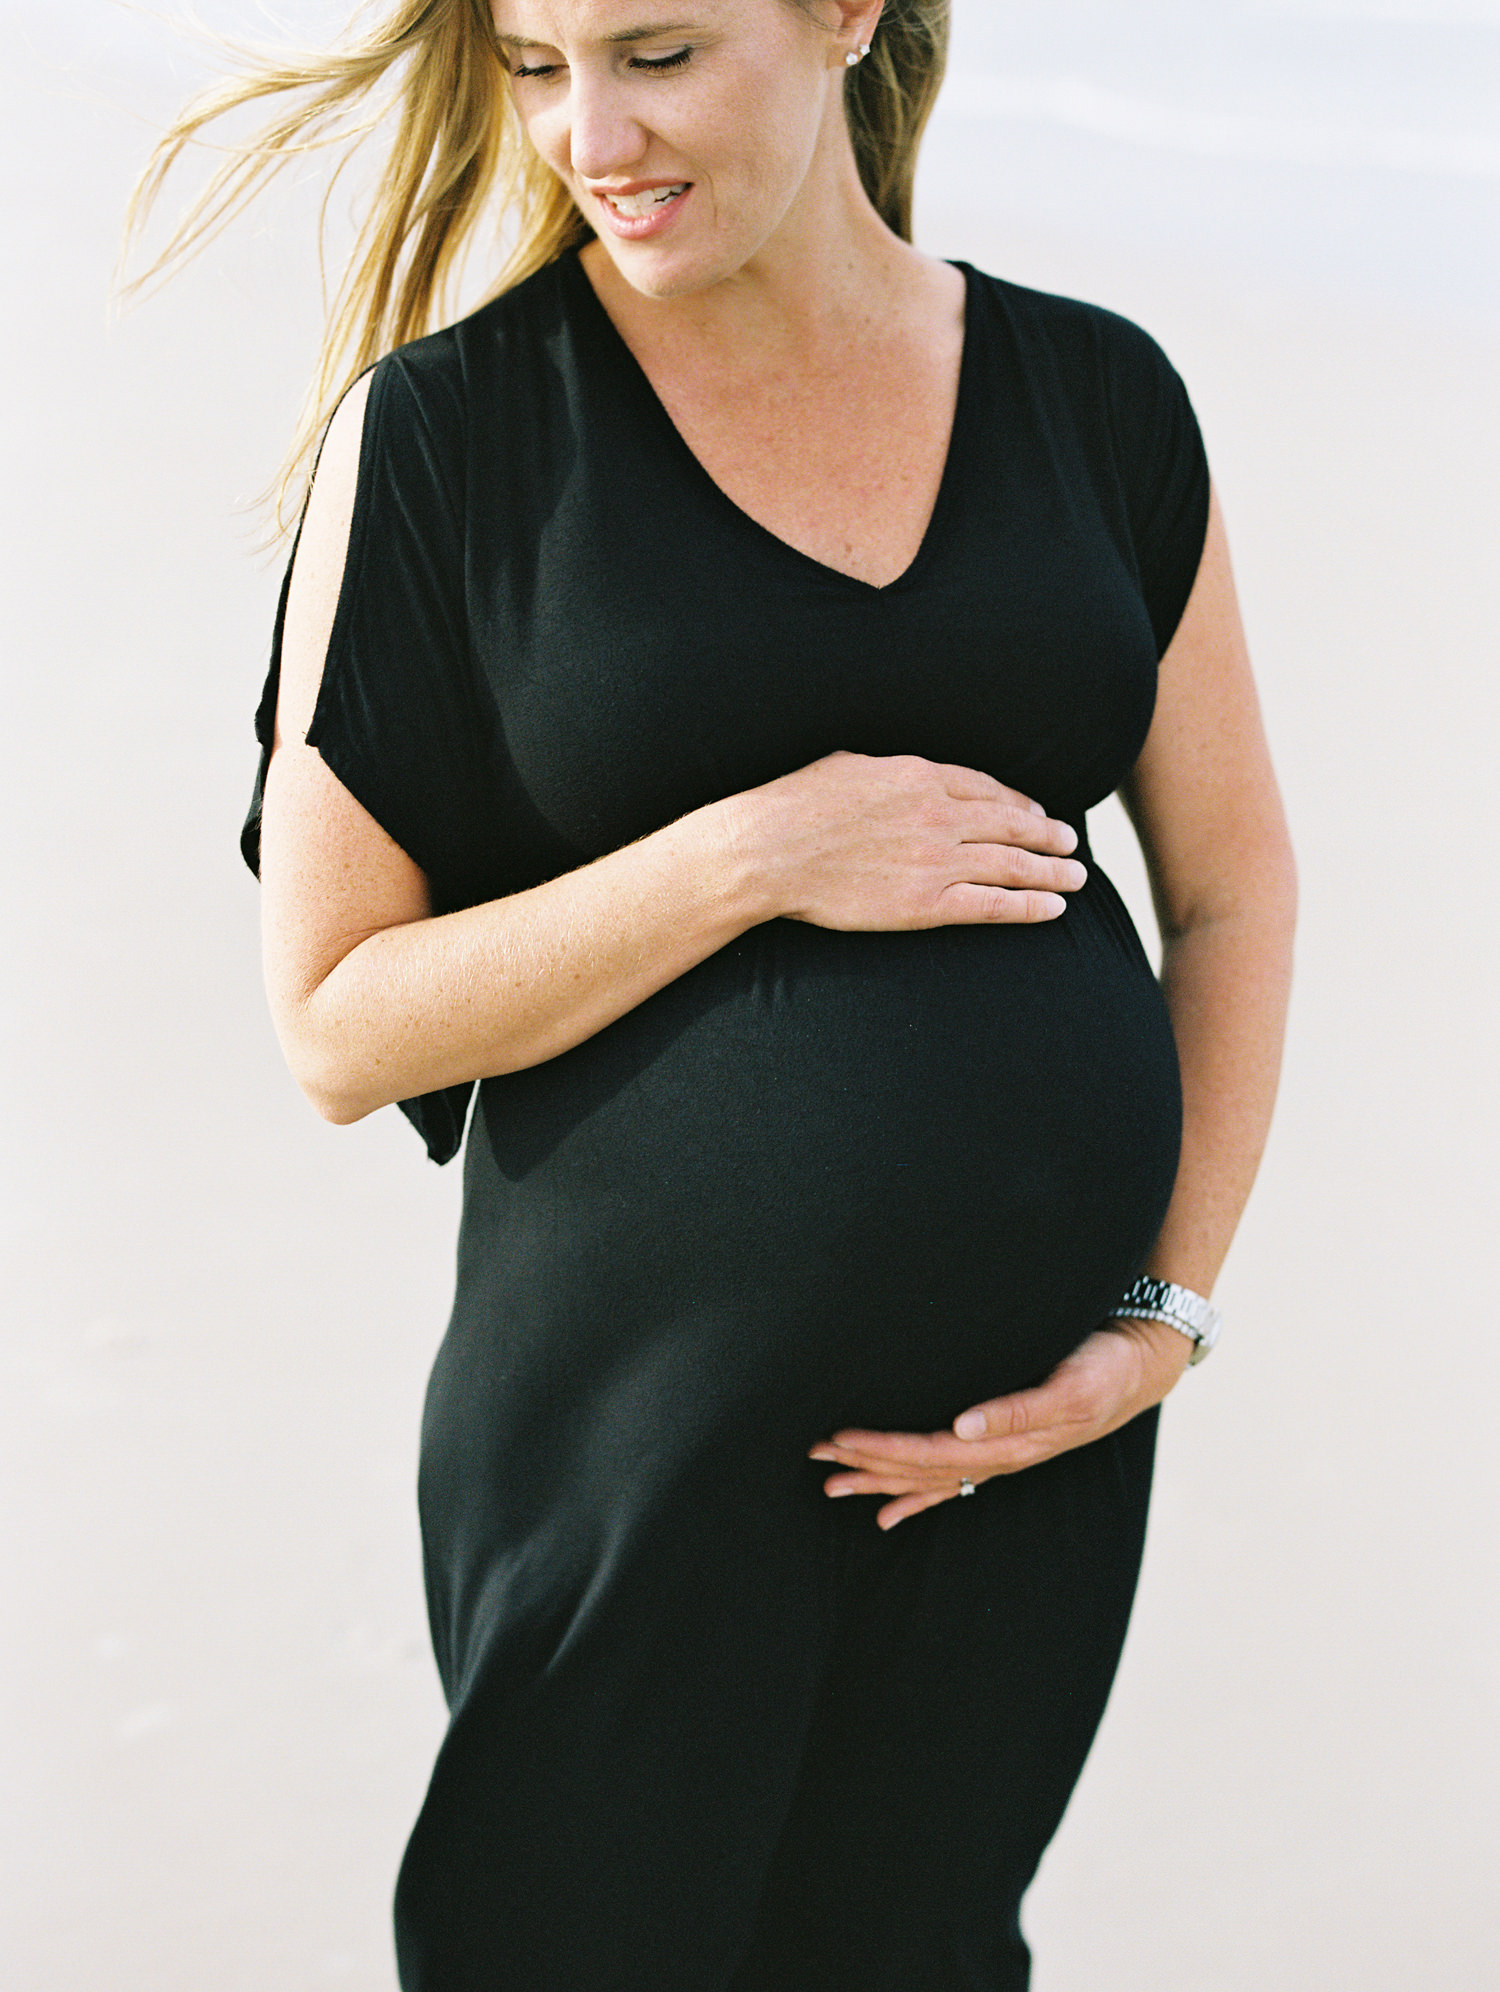 woman in a black v neck dress and long blonde hair holds her pregnant belly while looking down at her toddler